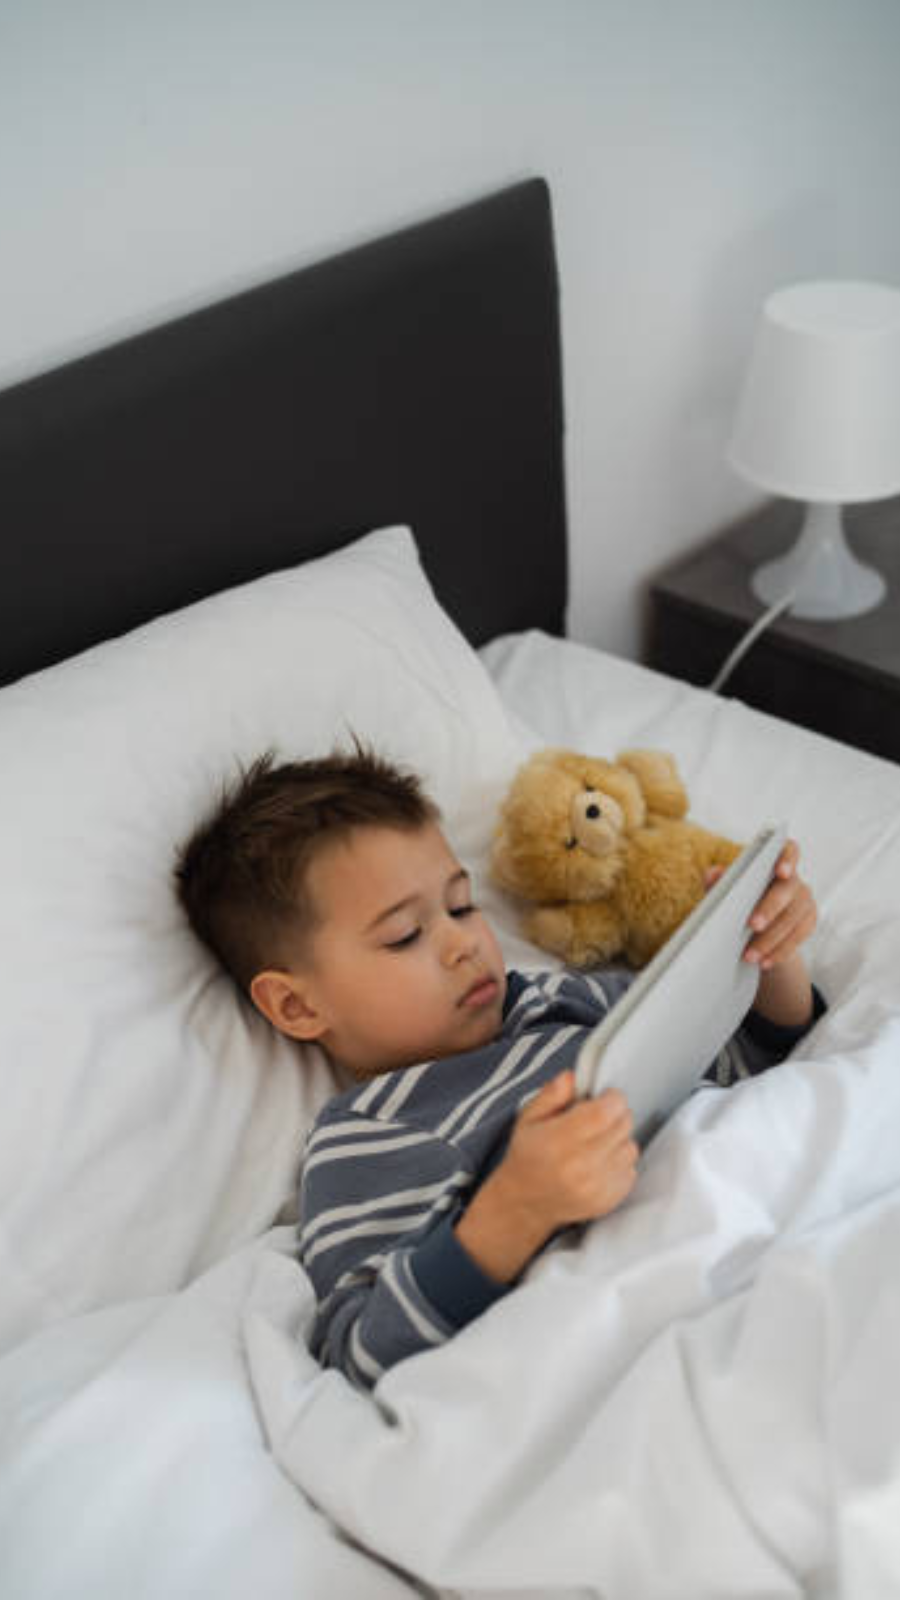 7 negative effects of too much screen time for kids 